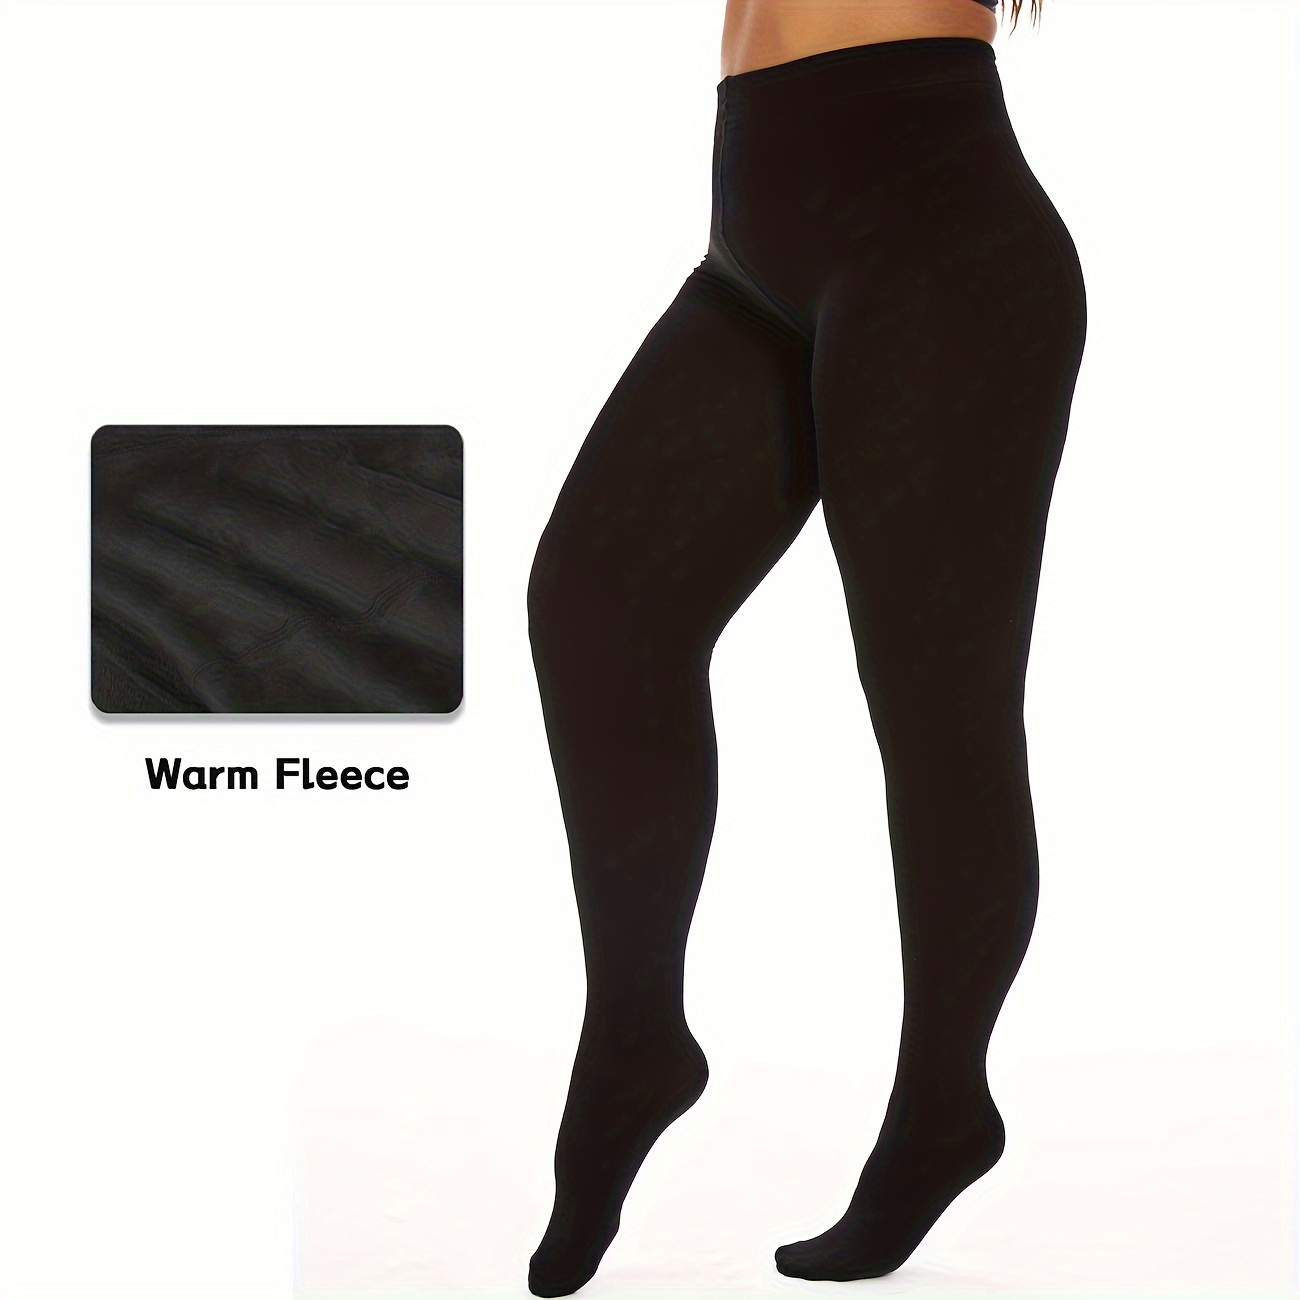 Plus Size Tights Womens Thick Fleece Lined Pantyhose High-Waist